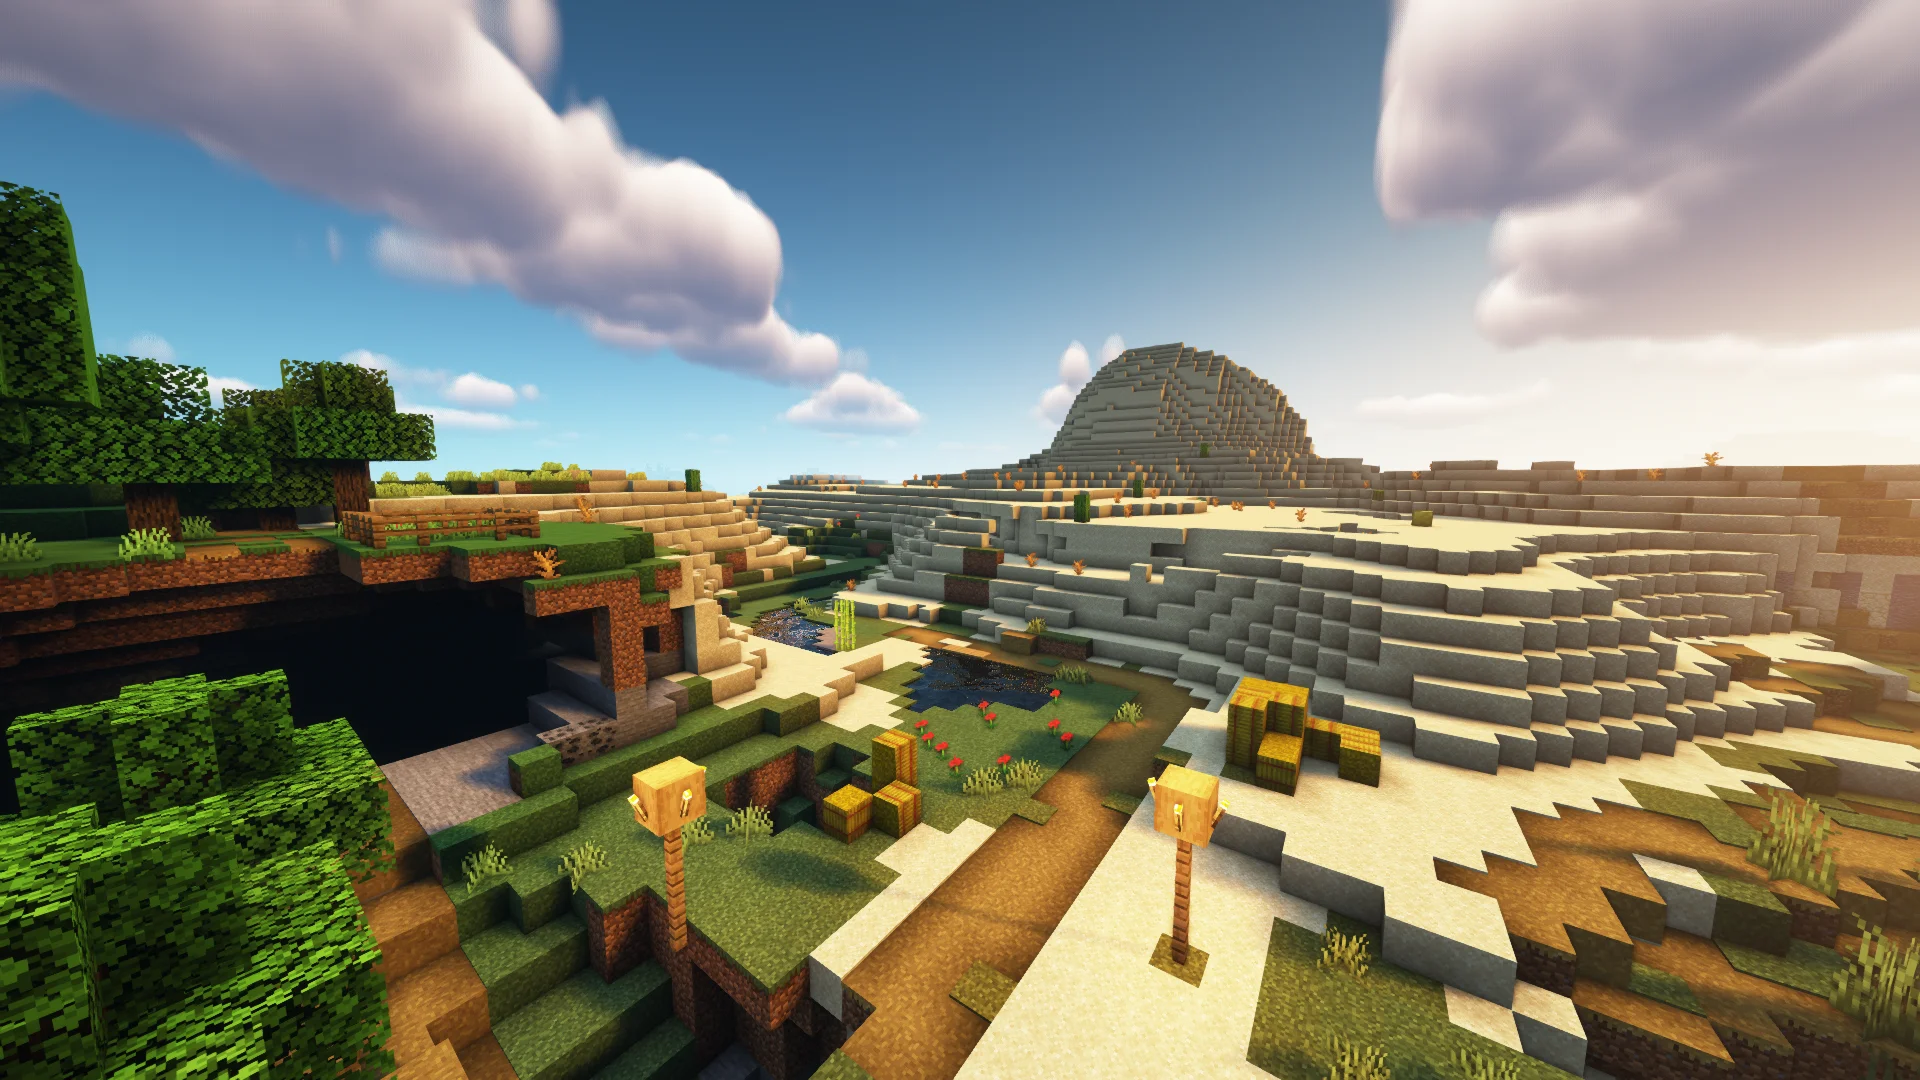 View of tall desert hill from a Minecraft village using AstraLex shaders